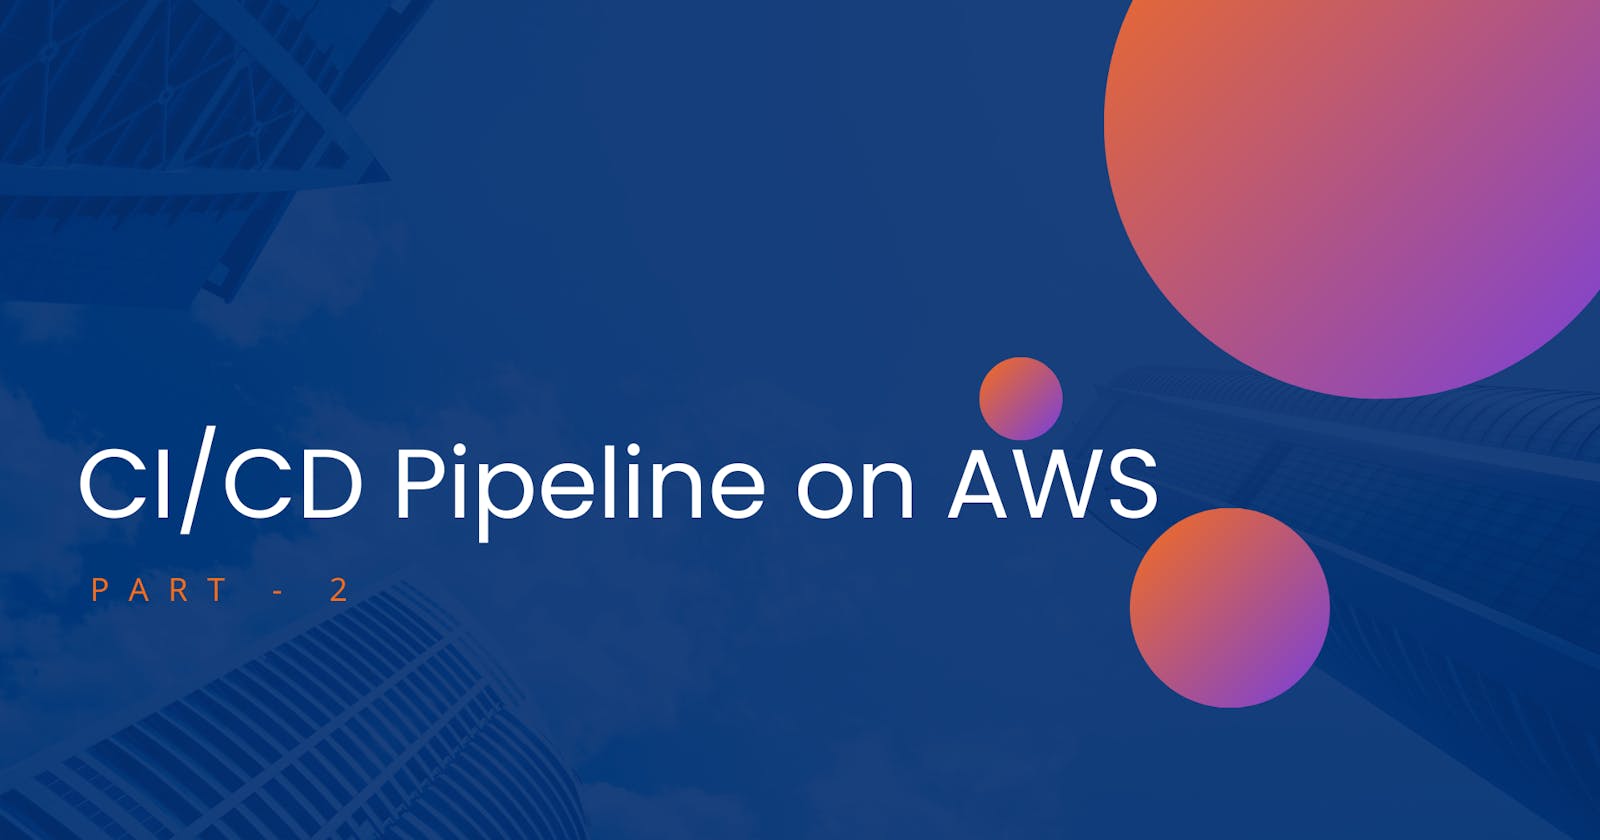 Day 51 - CI/CD pipeline on AWS(Part 2)